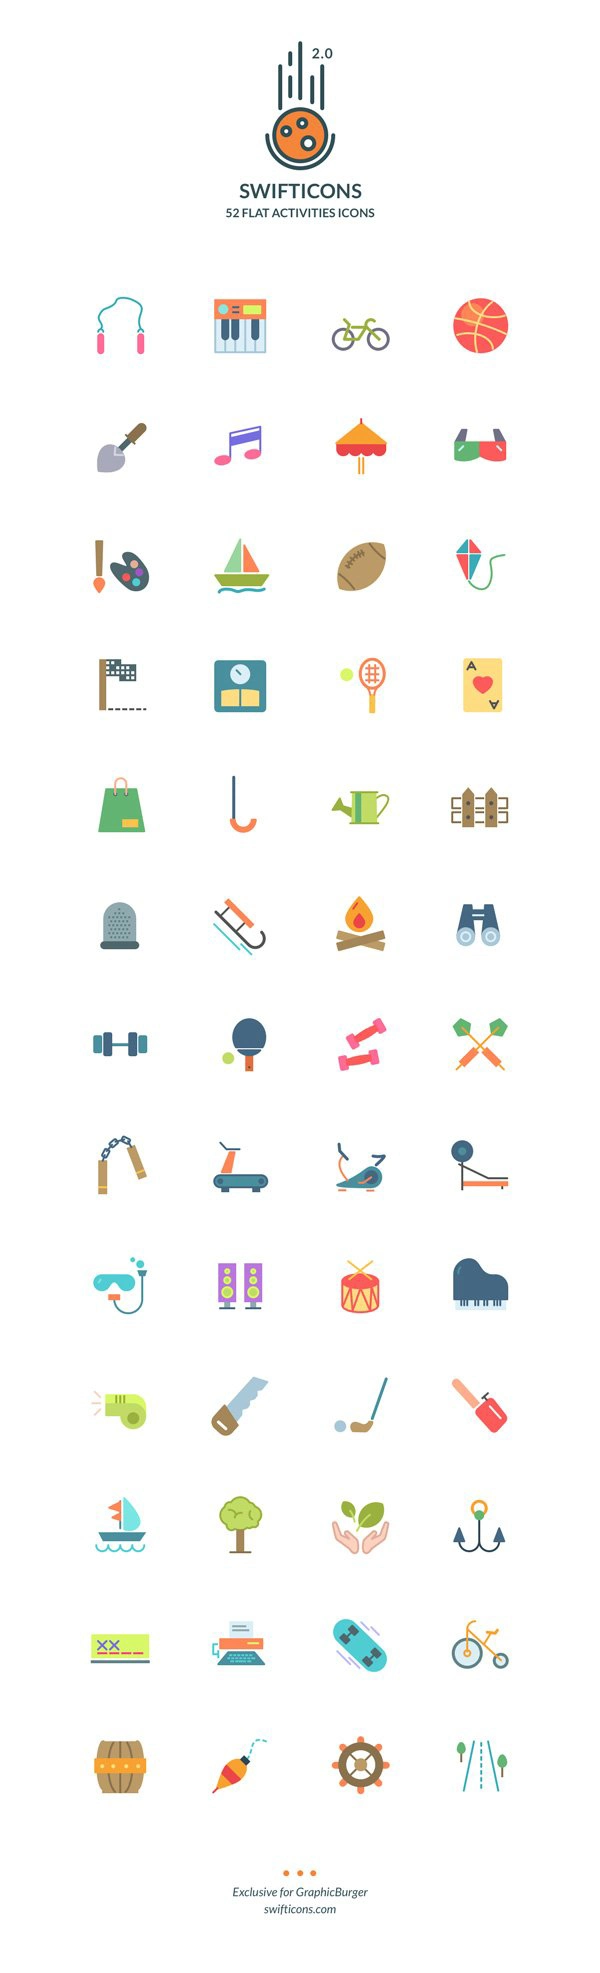 Swifticons – 52 Flat Activities Icons